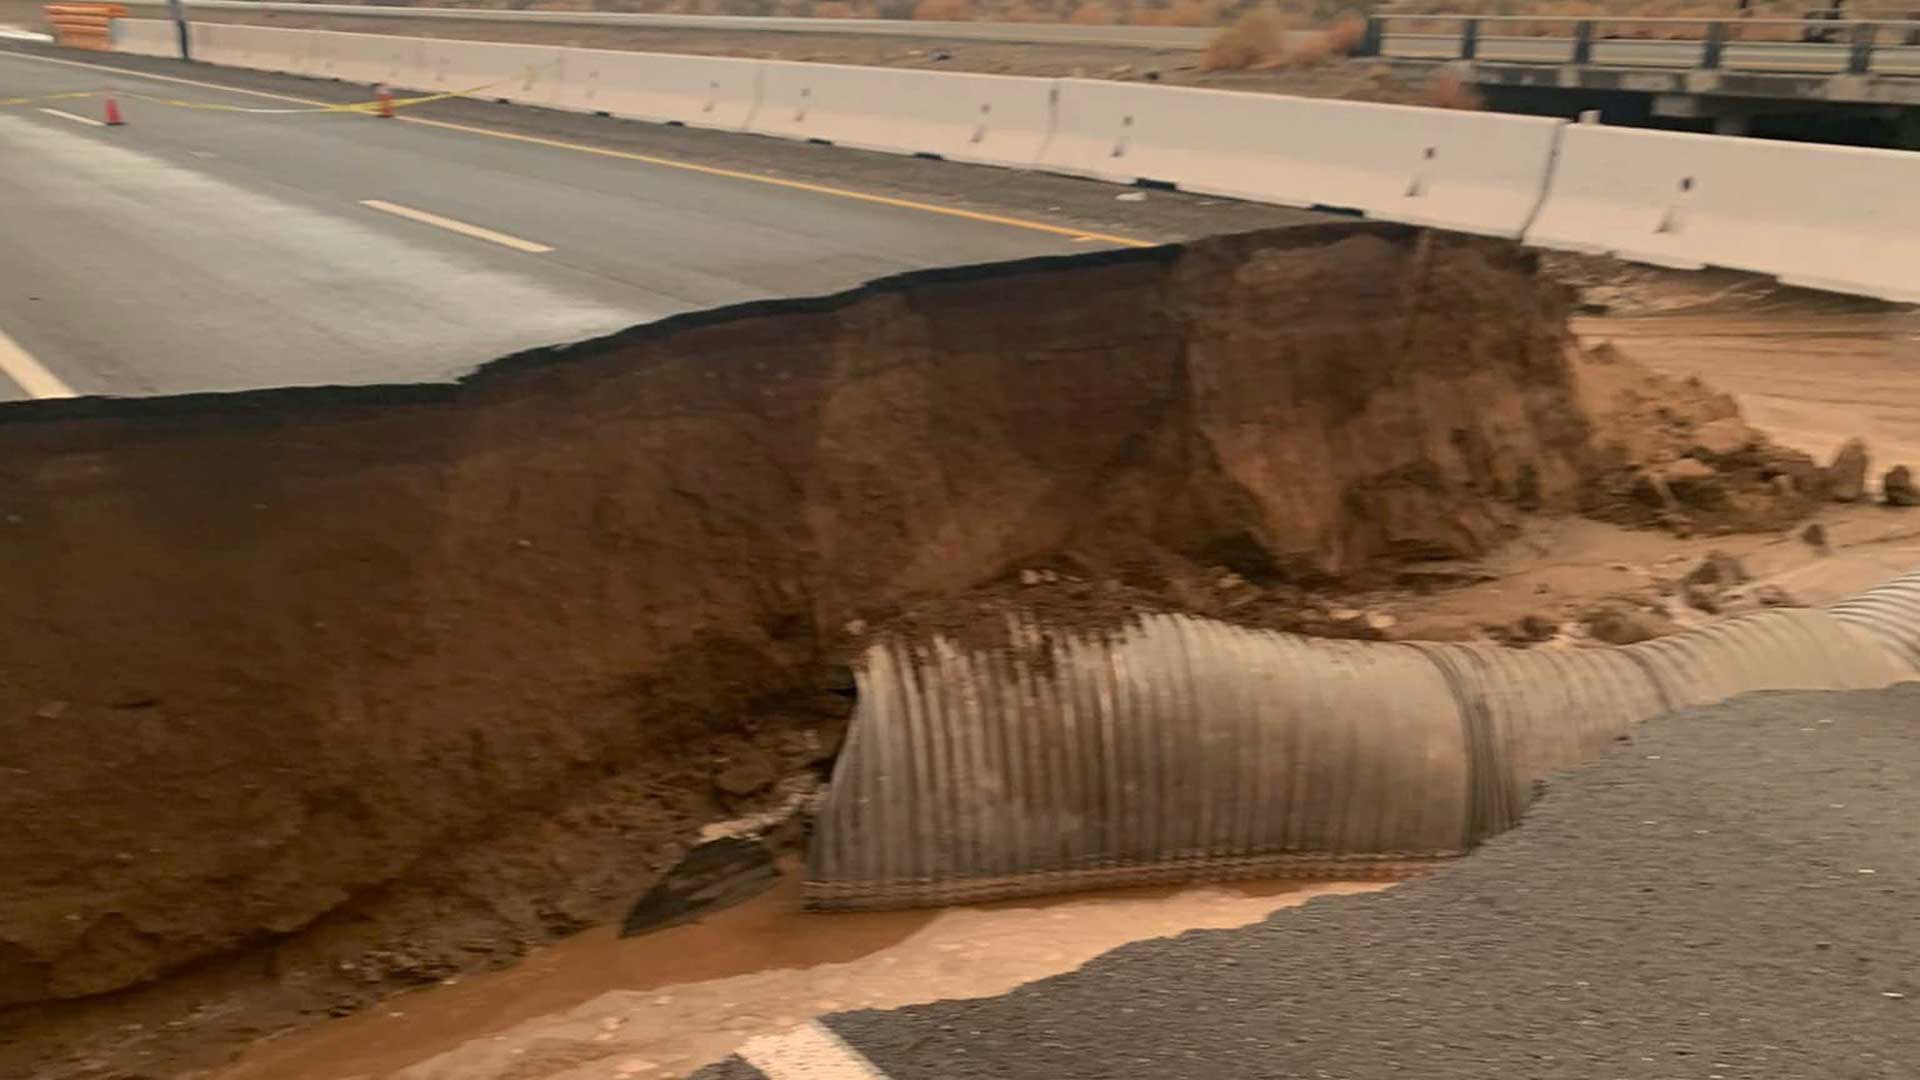 This photo provided by Caltrans shows a washed-out section of Interstate 10 near Desert Center, Calif., Wednesday, Aug. 24, 2022. Eastbound traffic on Interstate 10 in the Southern California desert was blocked Thursday after flash floods washed out the roadway. The latest round of flooding caused by monsoonal thunderstorms hit Wednesday evening and also impacted other desert highways. 